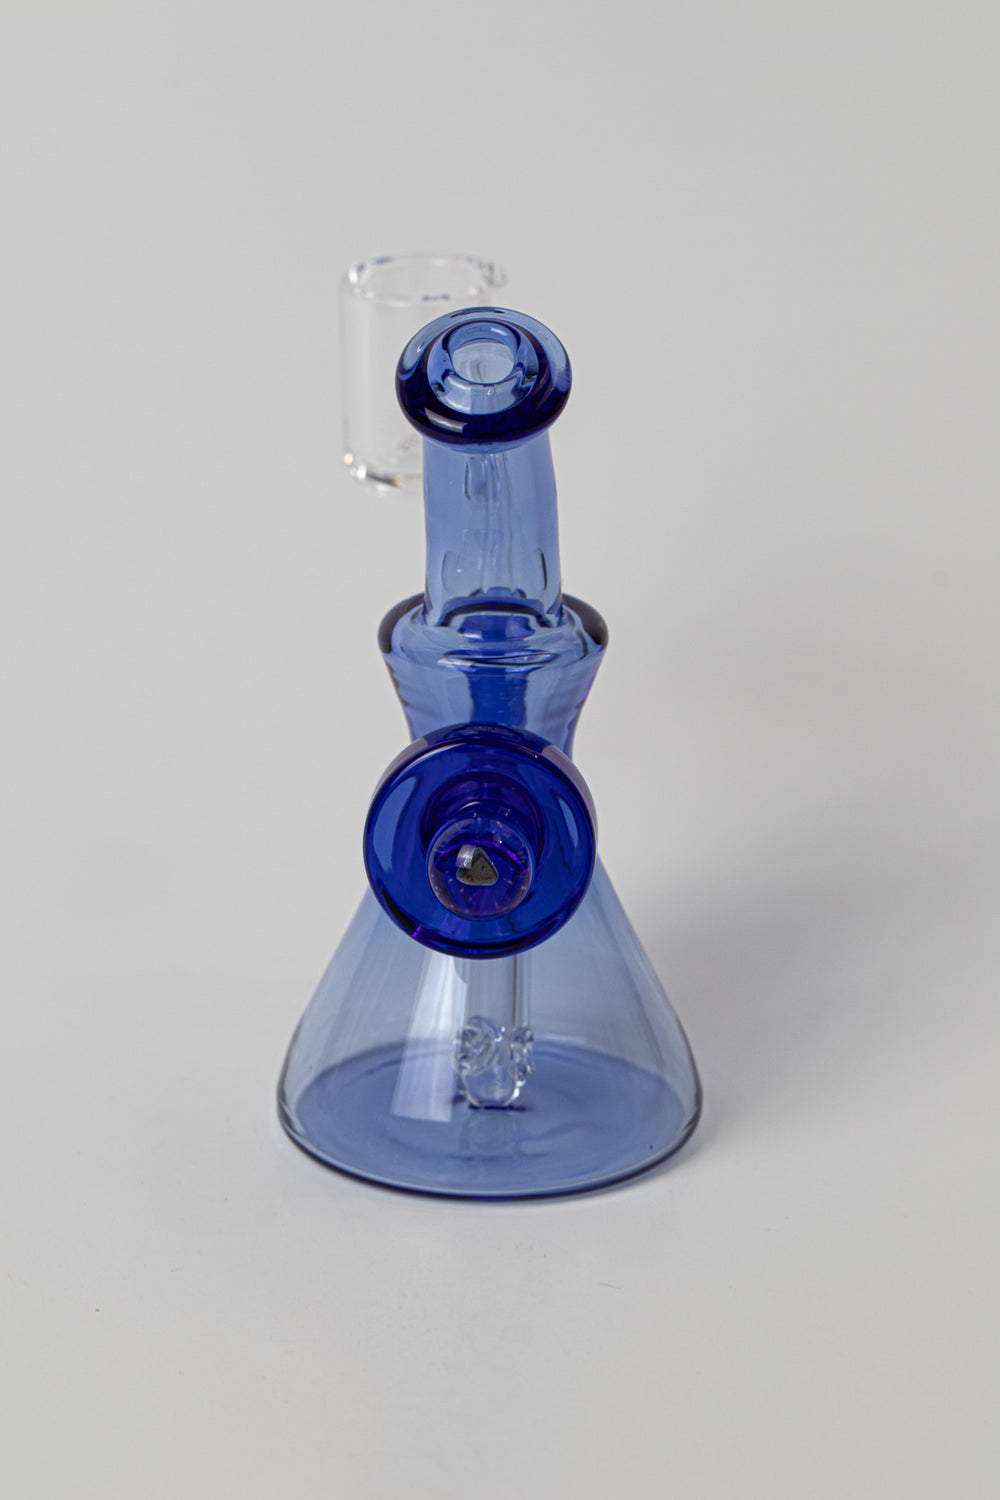 OIL Green/Blue Water Rig – a 4.5-inch Dabs banger included straight down stem built in . Less air flow more taste to weed / dabs